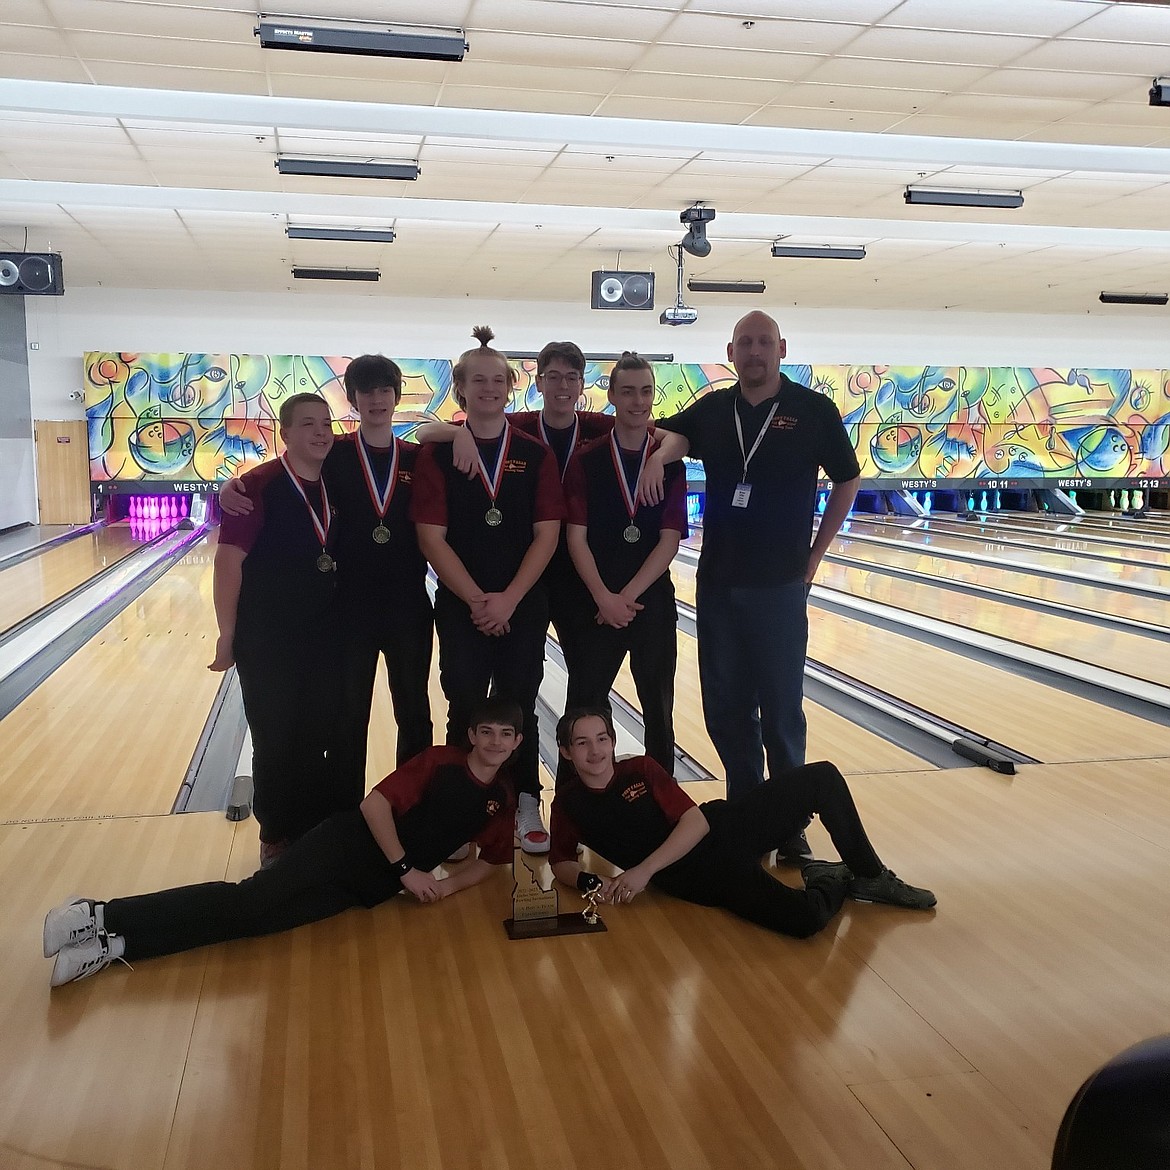 Courtesy photo
The Post Falls High School boys took first place in 5A at the recent state bowling championships in Garden City. In the front from left are Alex Higgins and Donald Shaw, and back row from left, Alex Walker, Eric Campbell, Bladen Huffaker, Quinlan Campenella, Jayson Austin and Bryan Rider (coach).